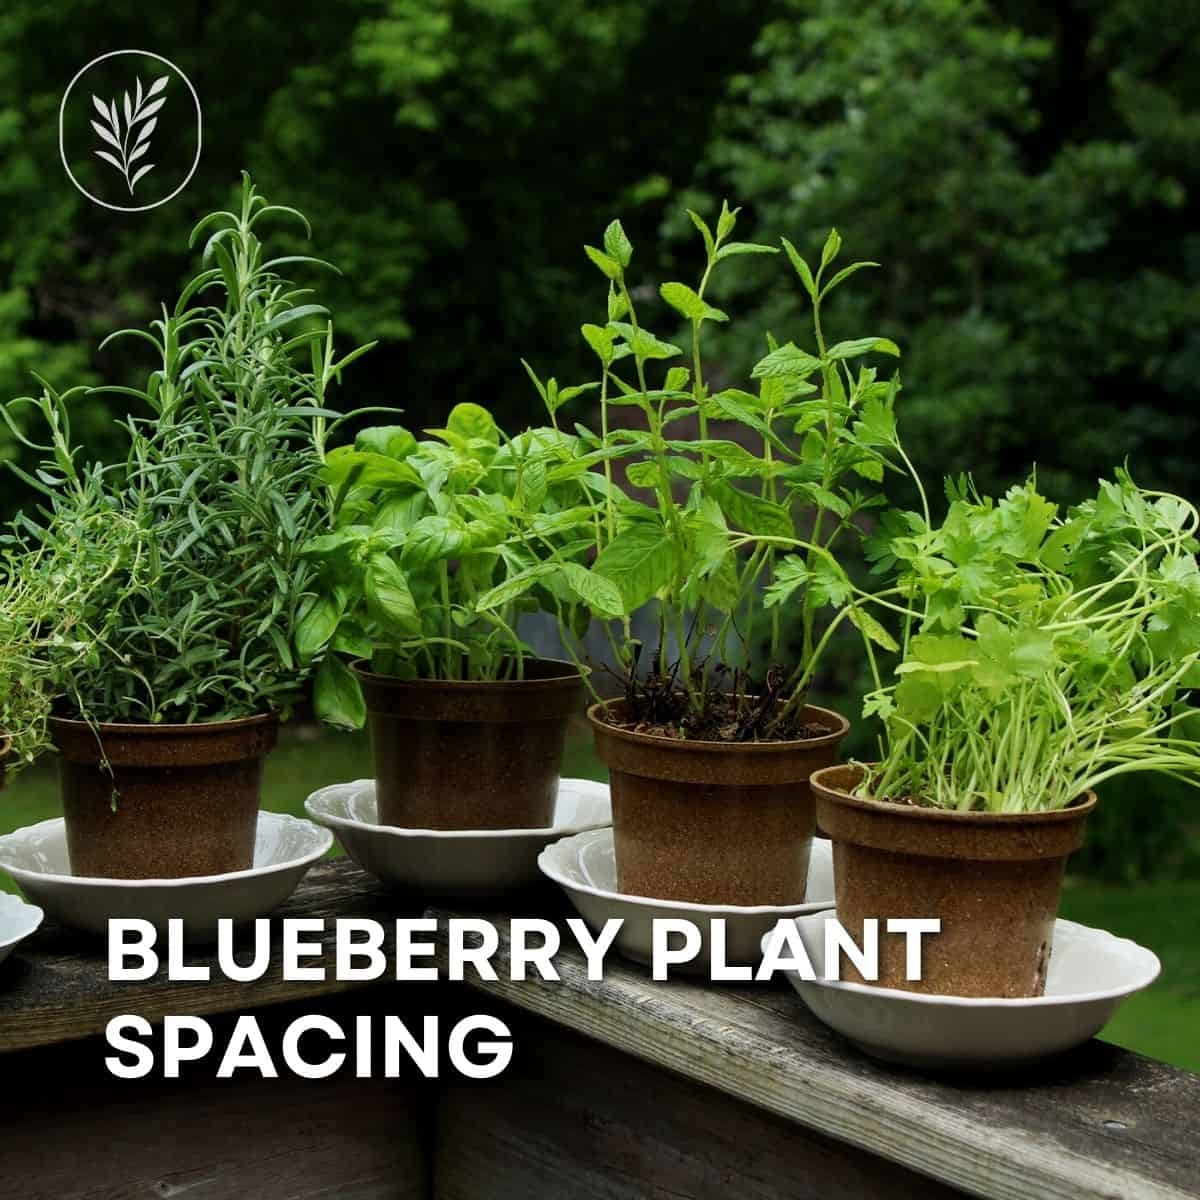 If you're planting a few blueberry bushes, its time to consider blueberry plant spacing. Whether you're planting a whole field or just a few shrubs along a pathway, its worth figuring out how far apart to plant them before you get out the shovel. Via @home4theharvest